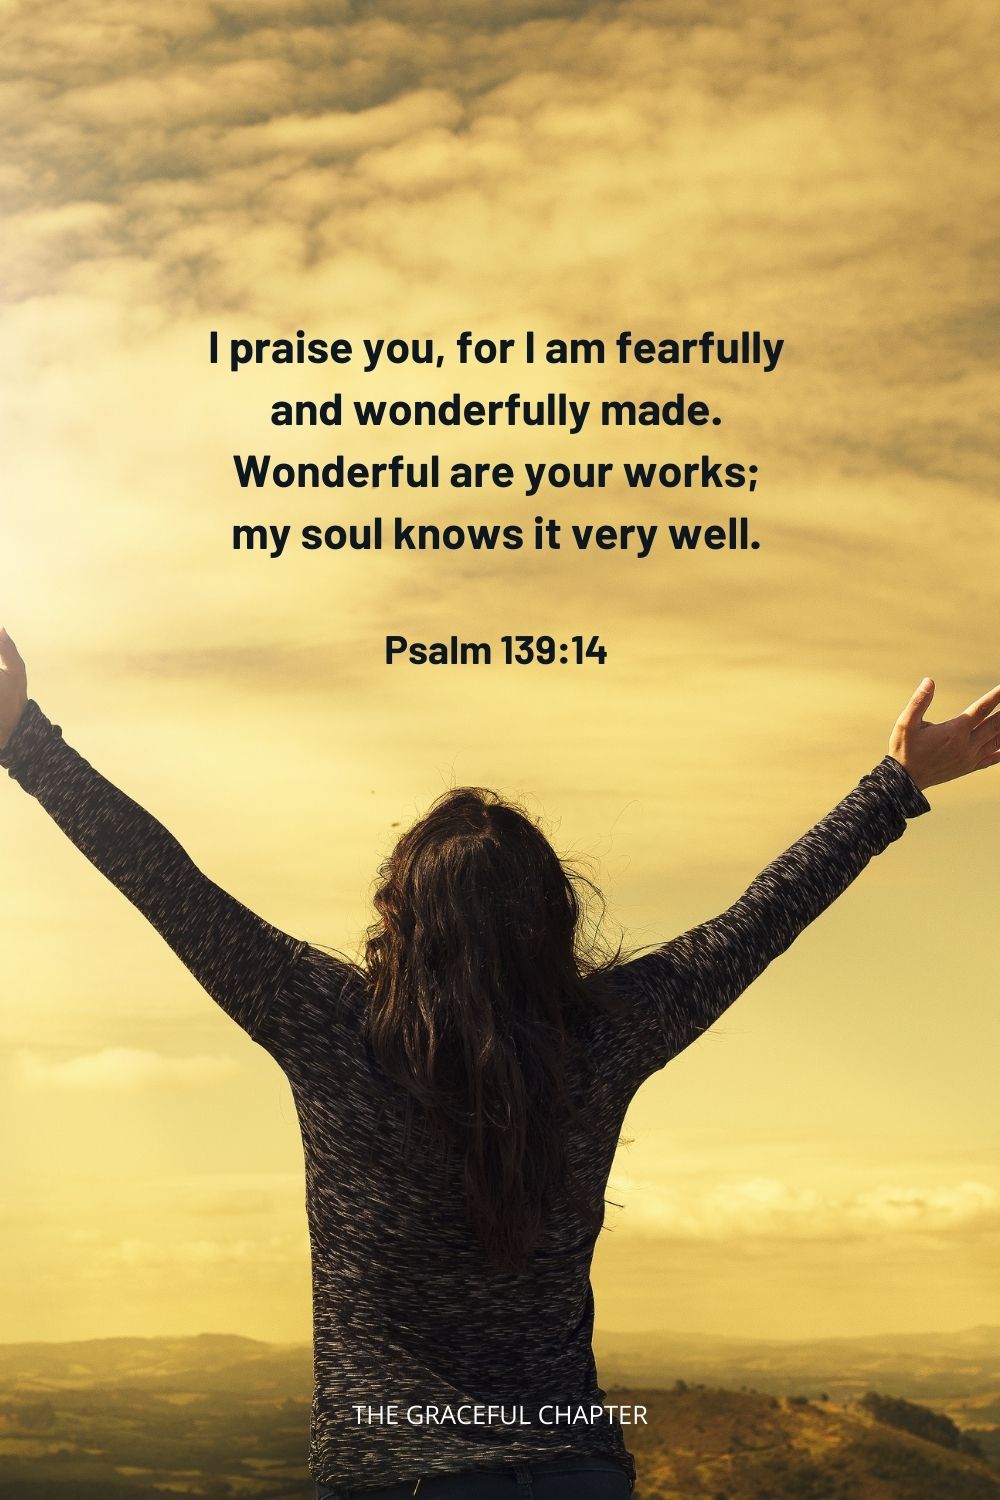 I praise you, for I am fearfully and wonderfully made. Wonderful are your works; my soul knows it very well. Psalm 139:14